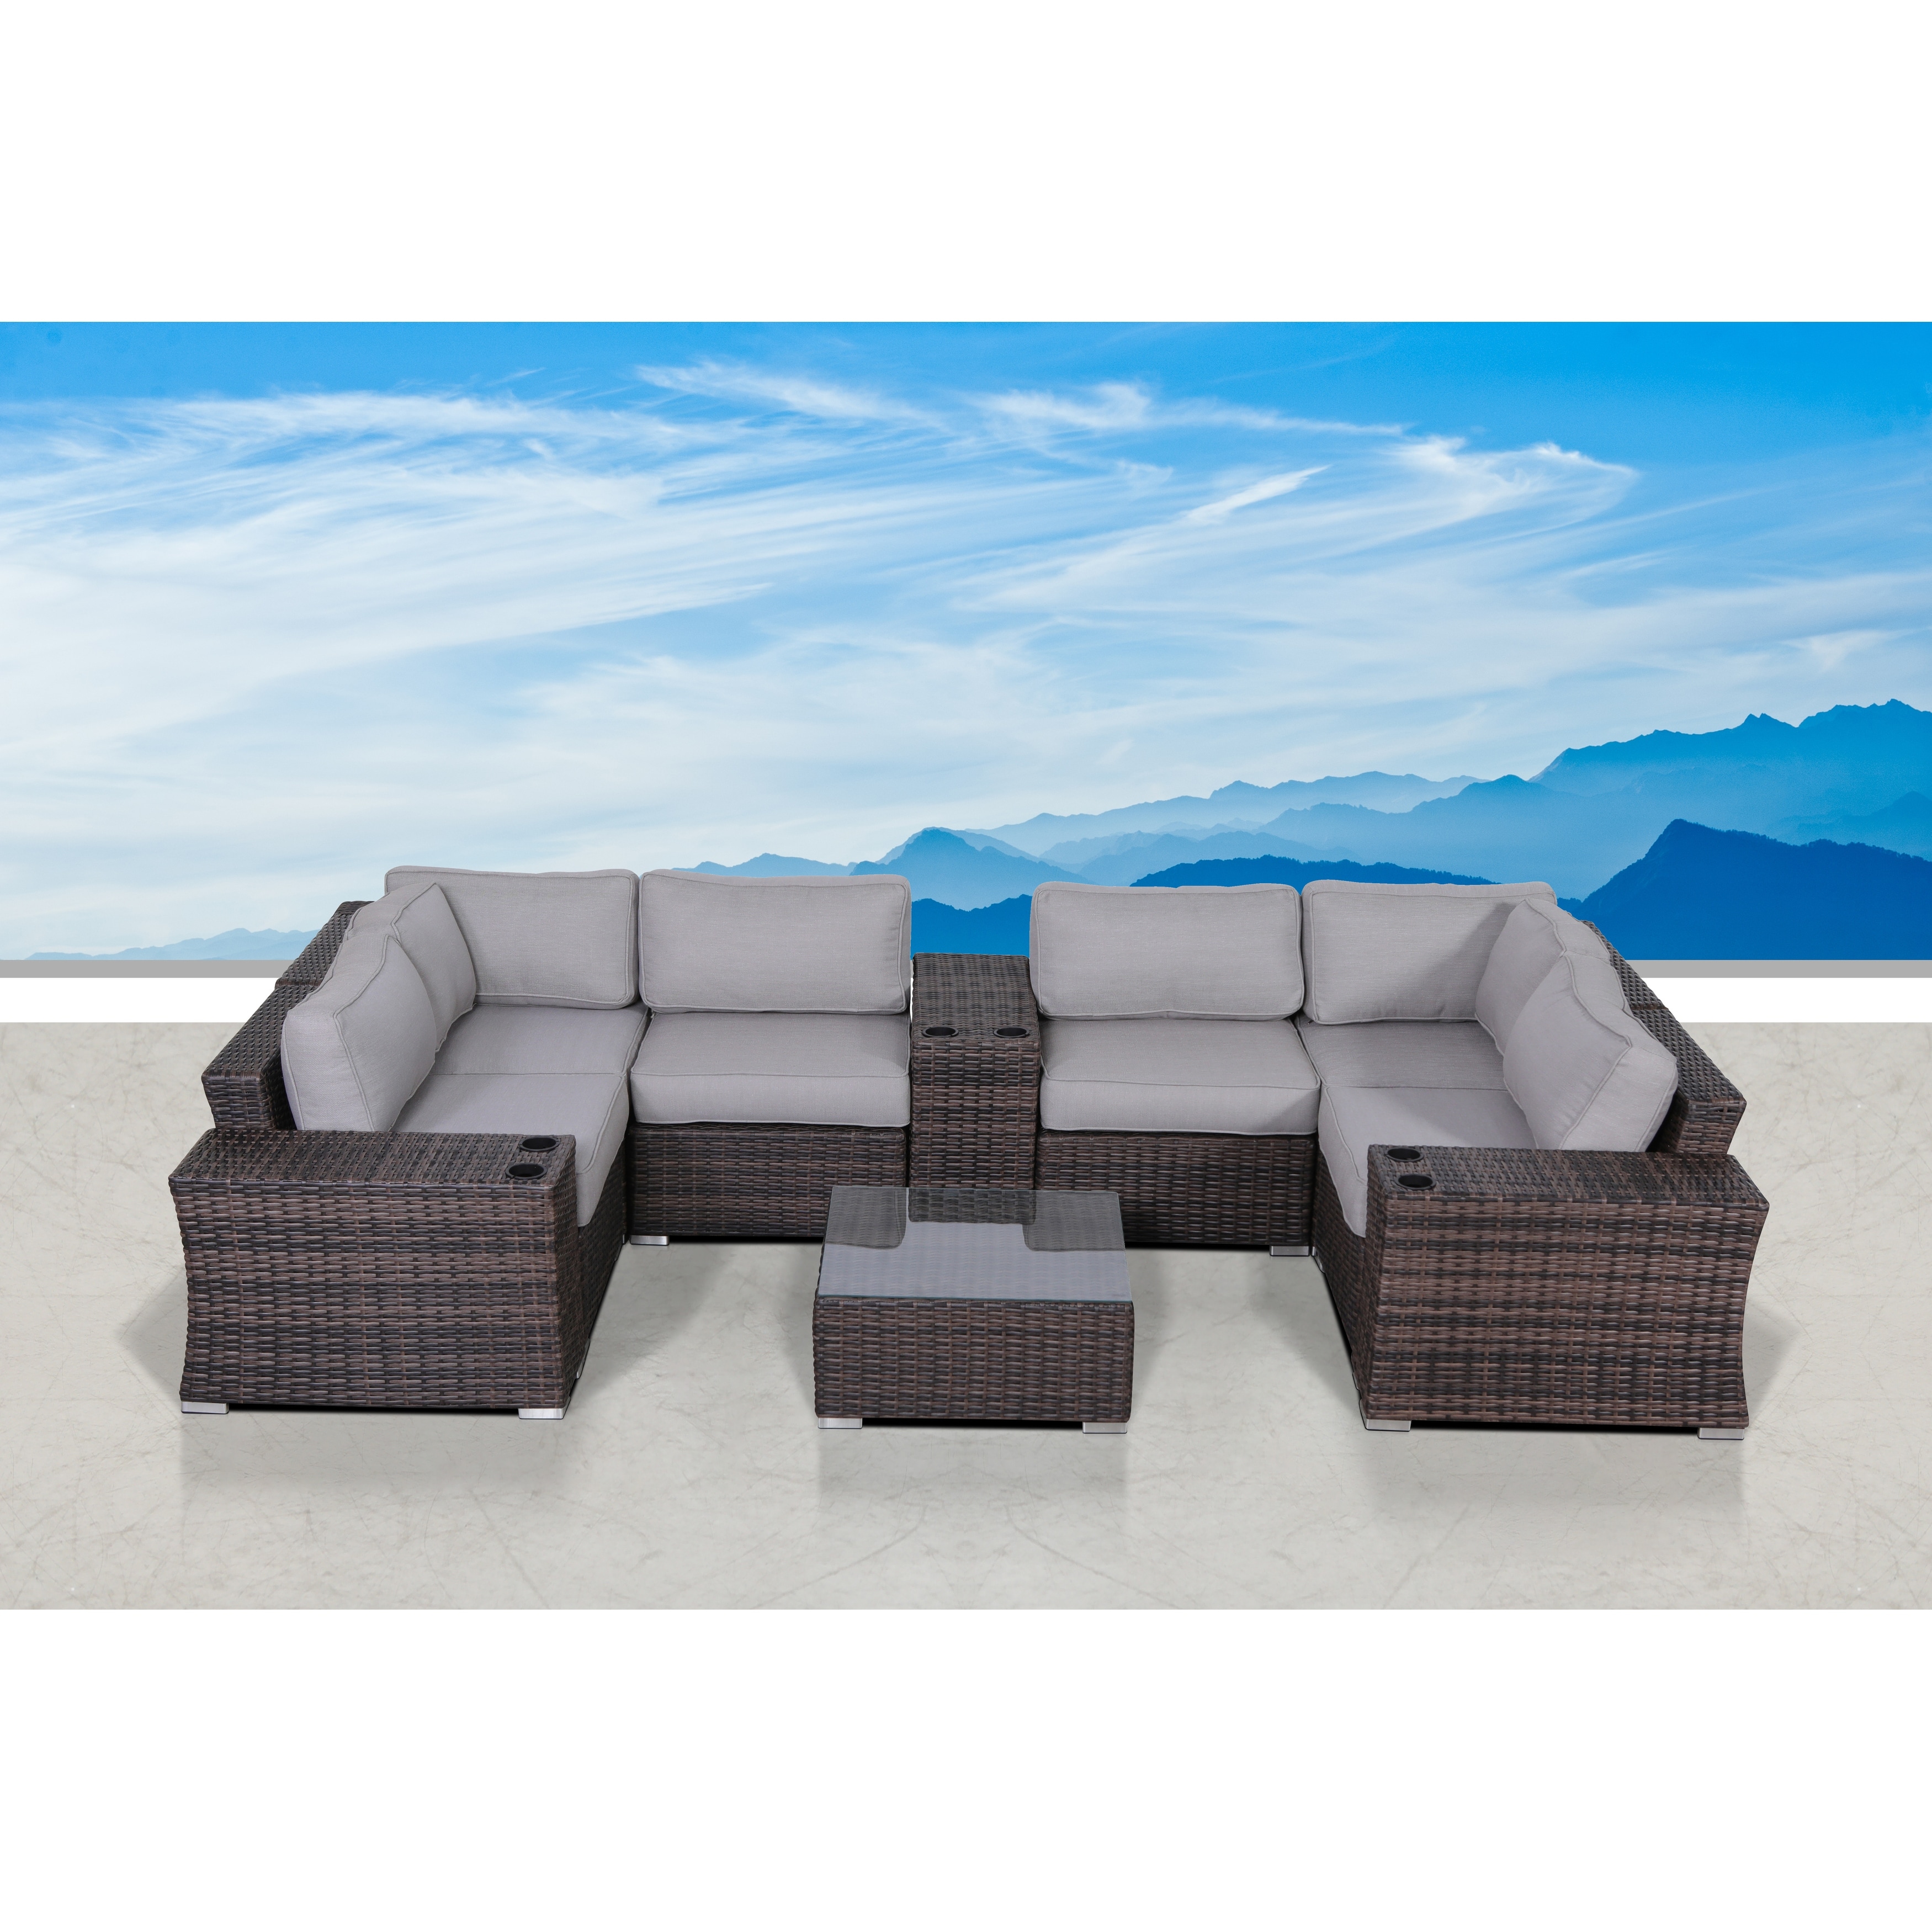 Lsi Wicker/rattan 4 - Person Seating Group With Cushions